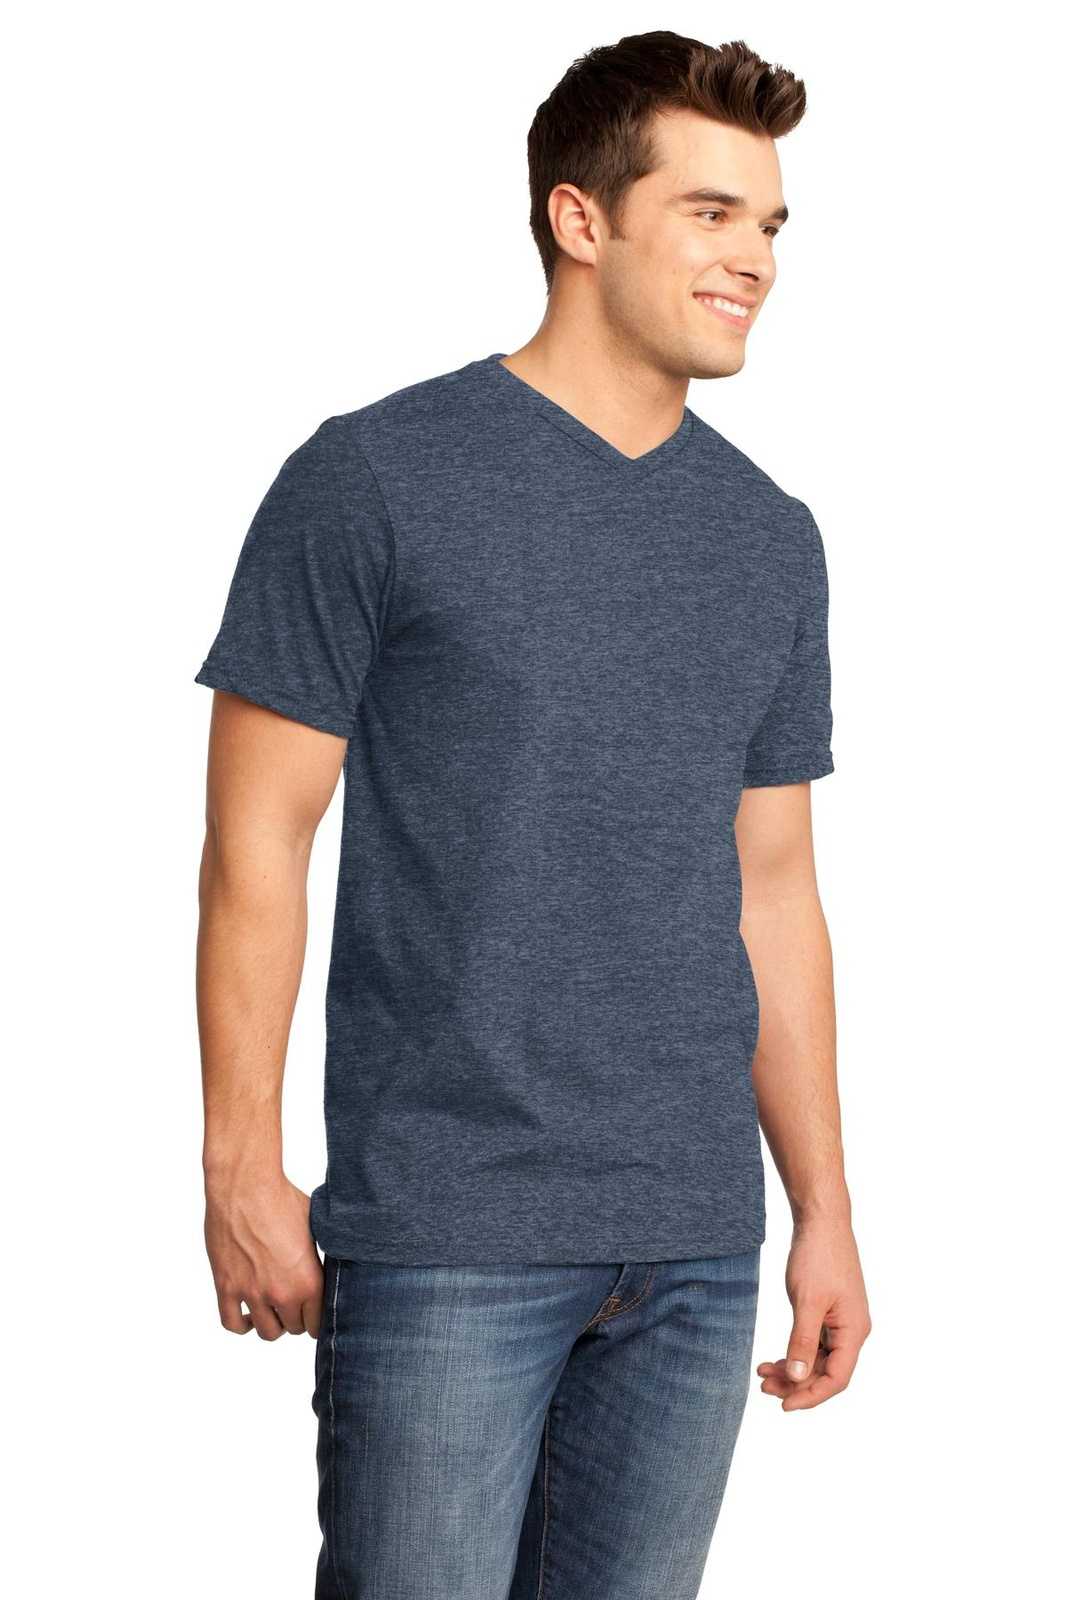 District DT6500 Very Important Tee V-Neck - Heathered Navy - HIT a Double - 4